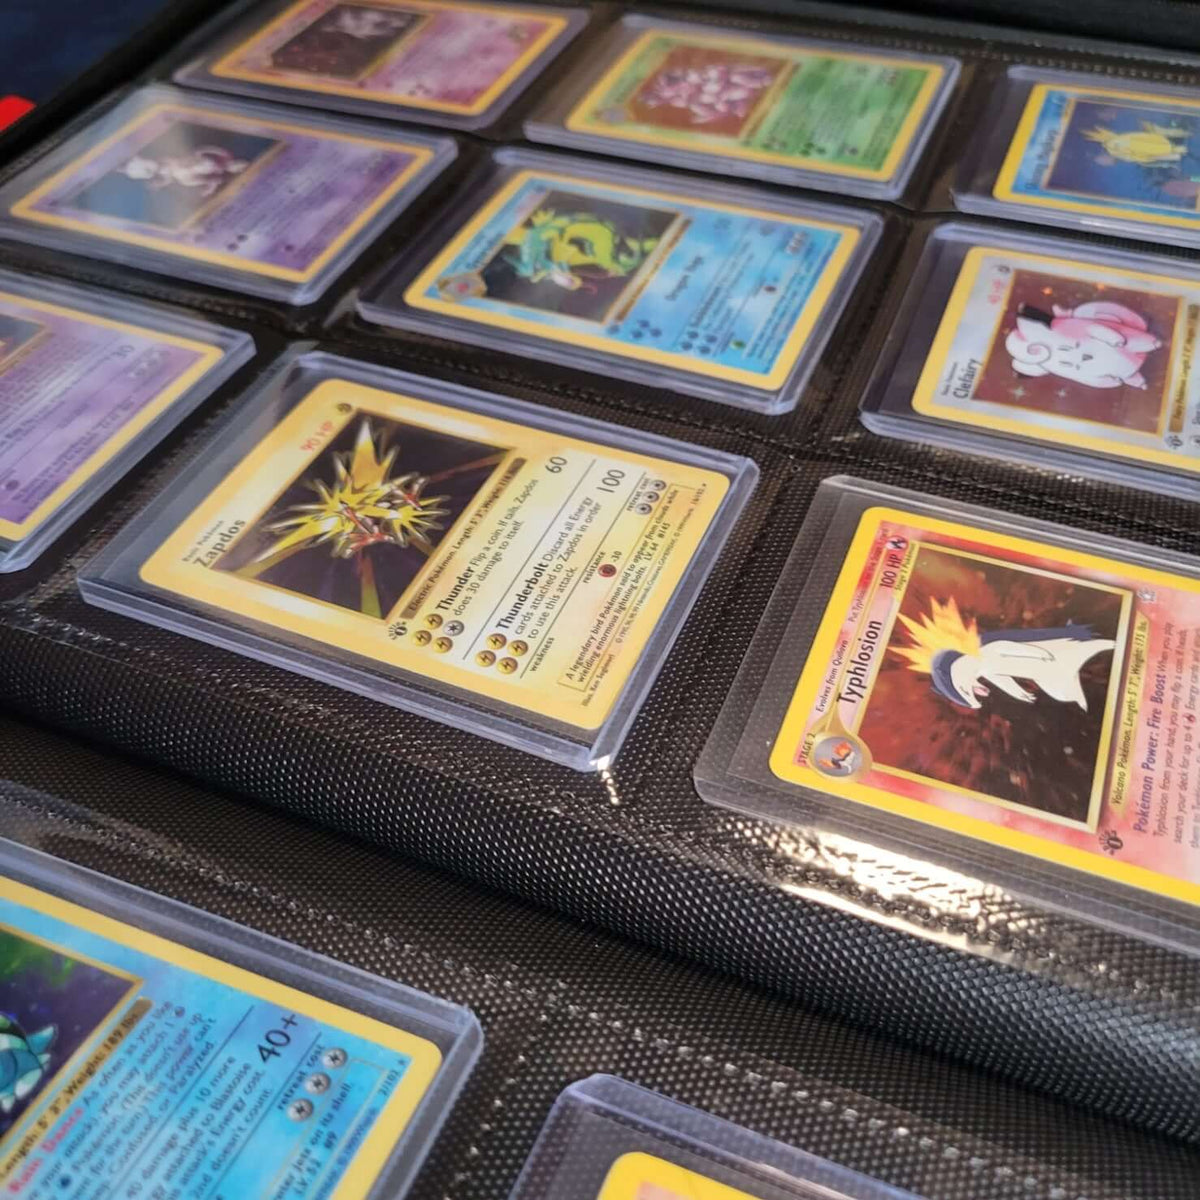 30 Special Pokemon Energy Cards Non-Basic with TopDeck Mini Binder